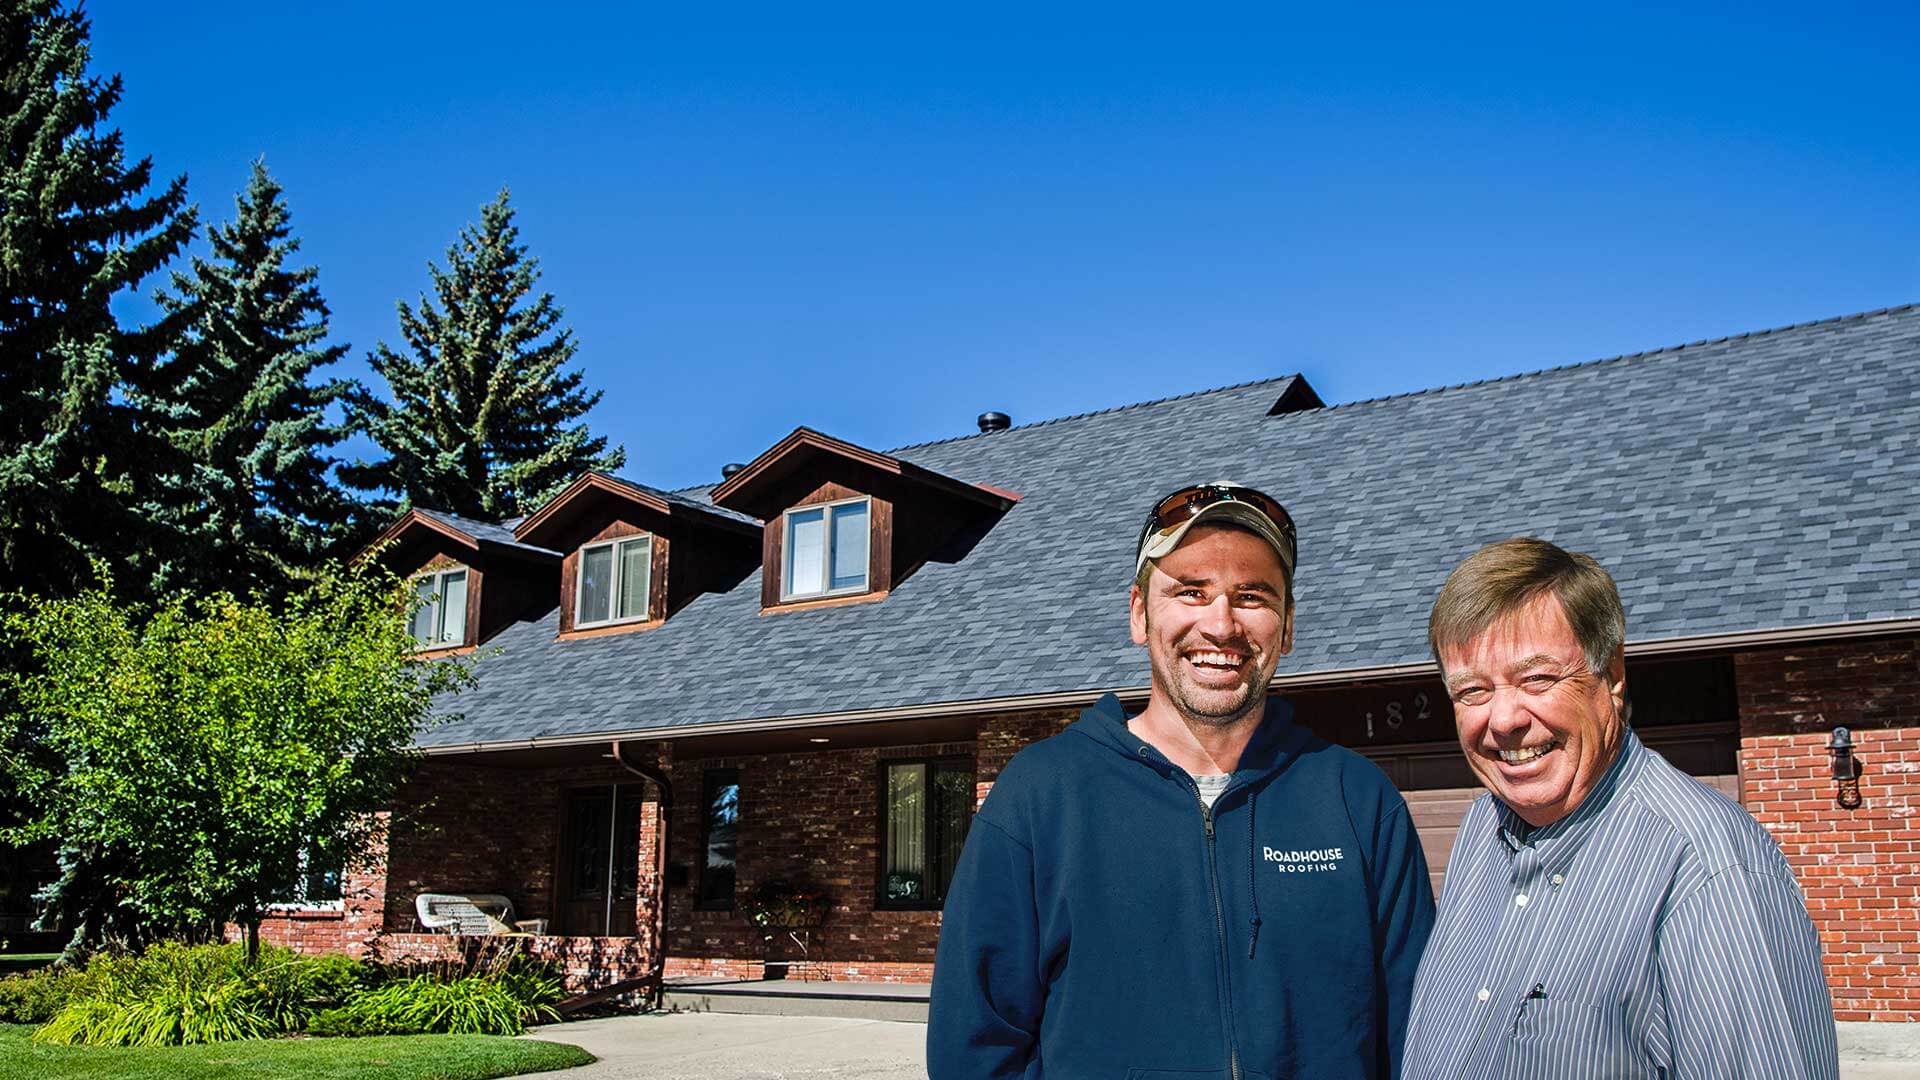 Roadhouse Roofing - Where Quality & Reliability Peak